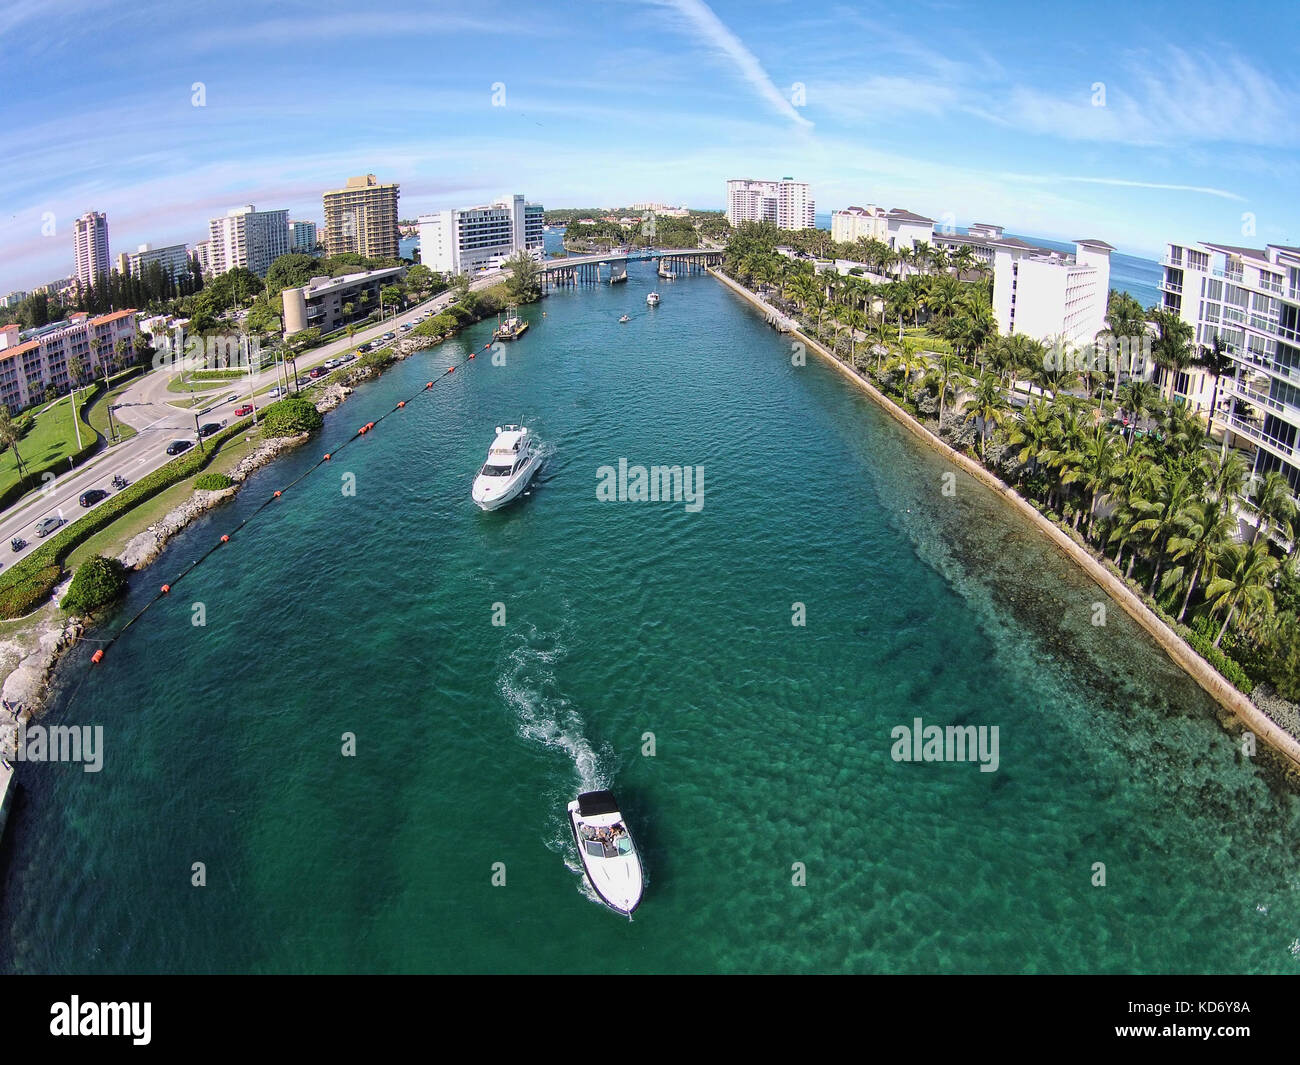 Aerial view of boating inlet in Boca Raton, Florida Stock Photo